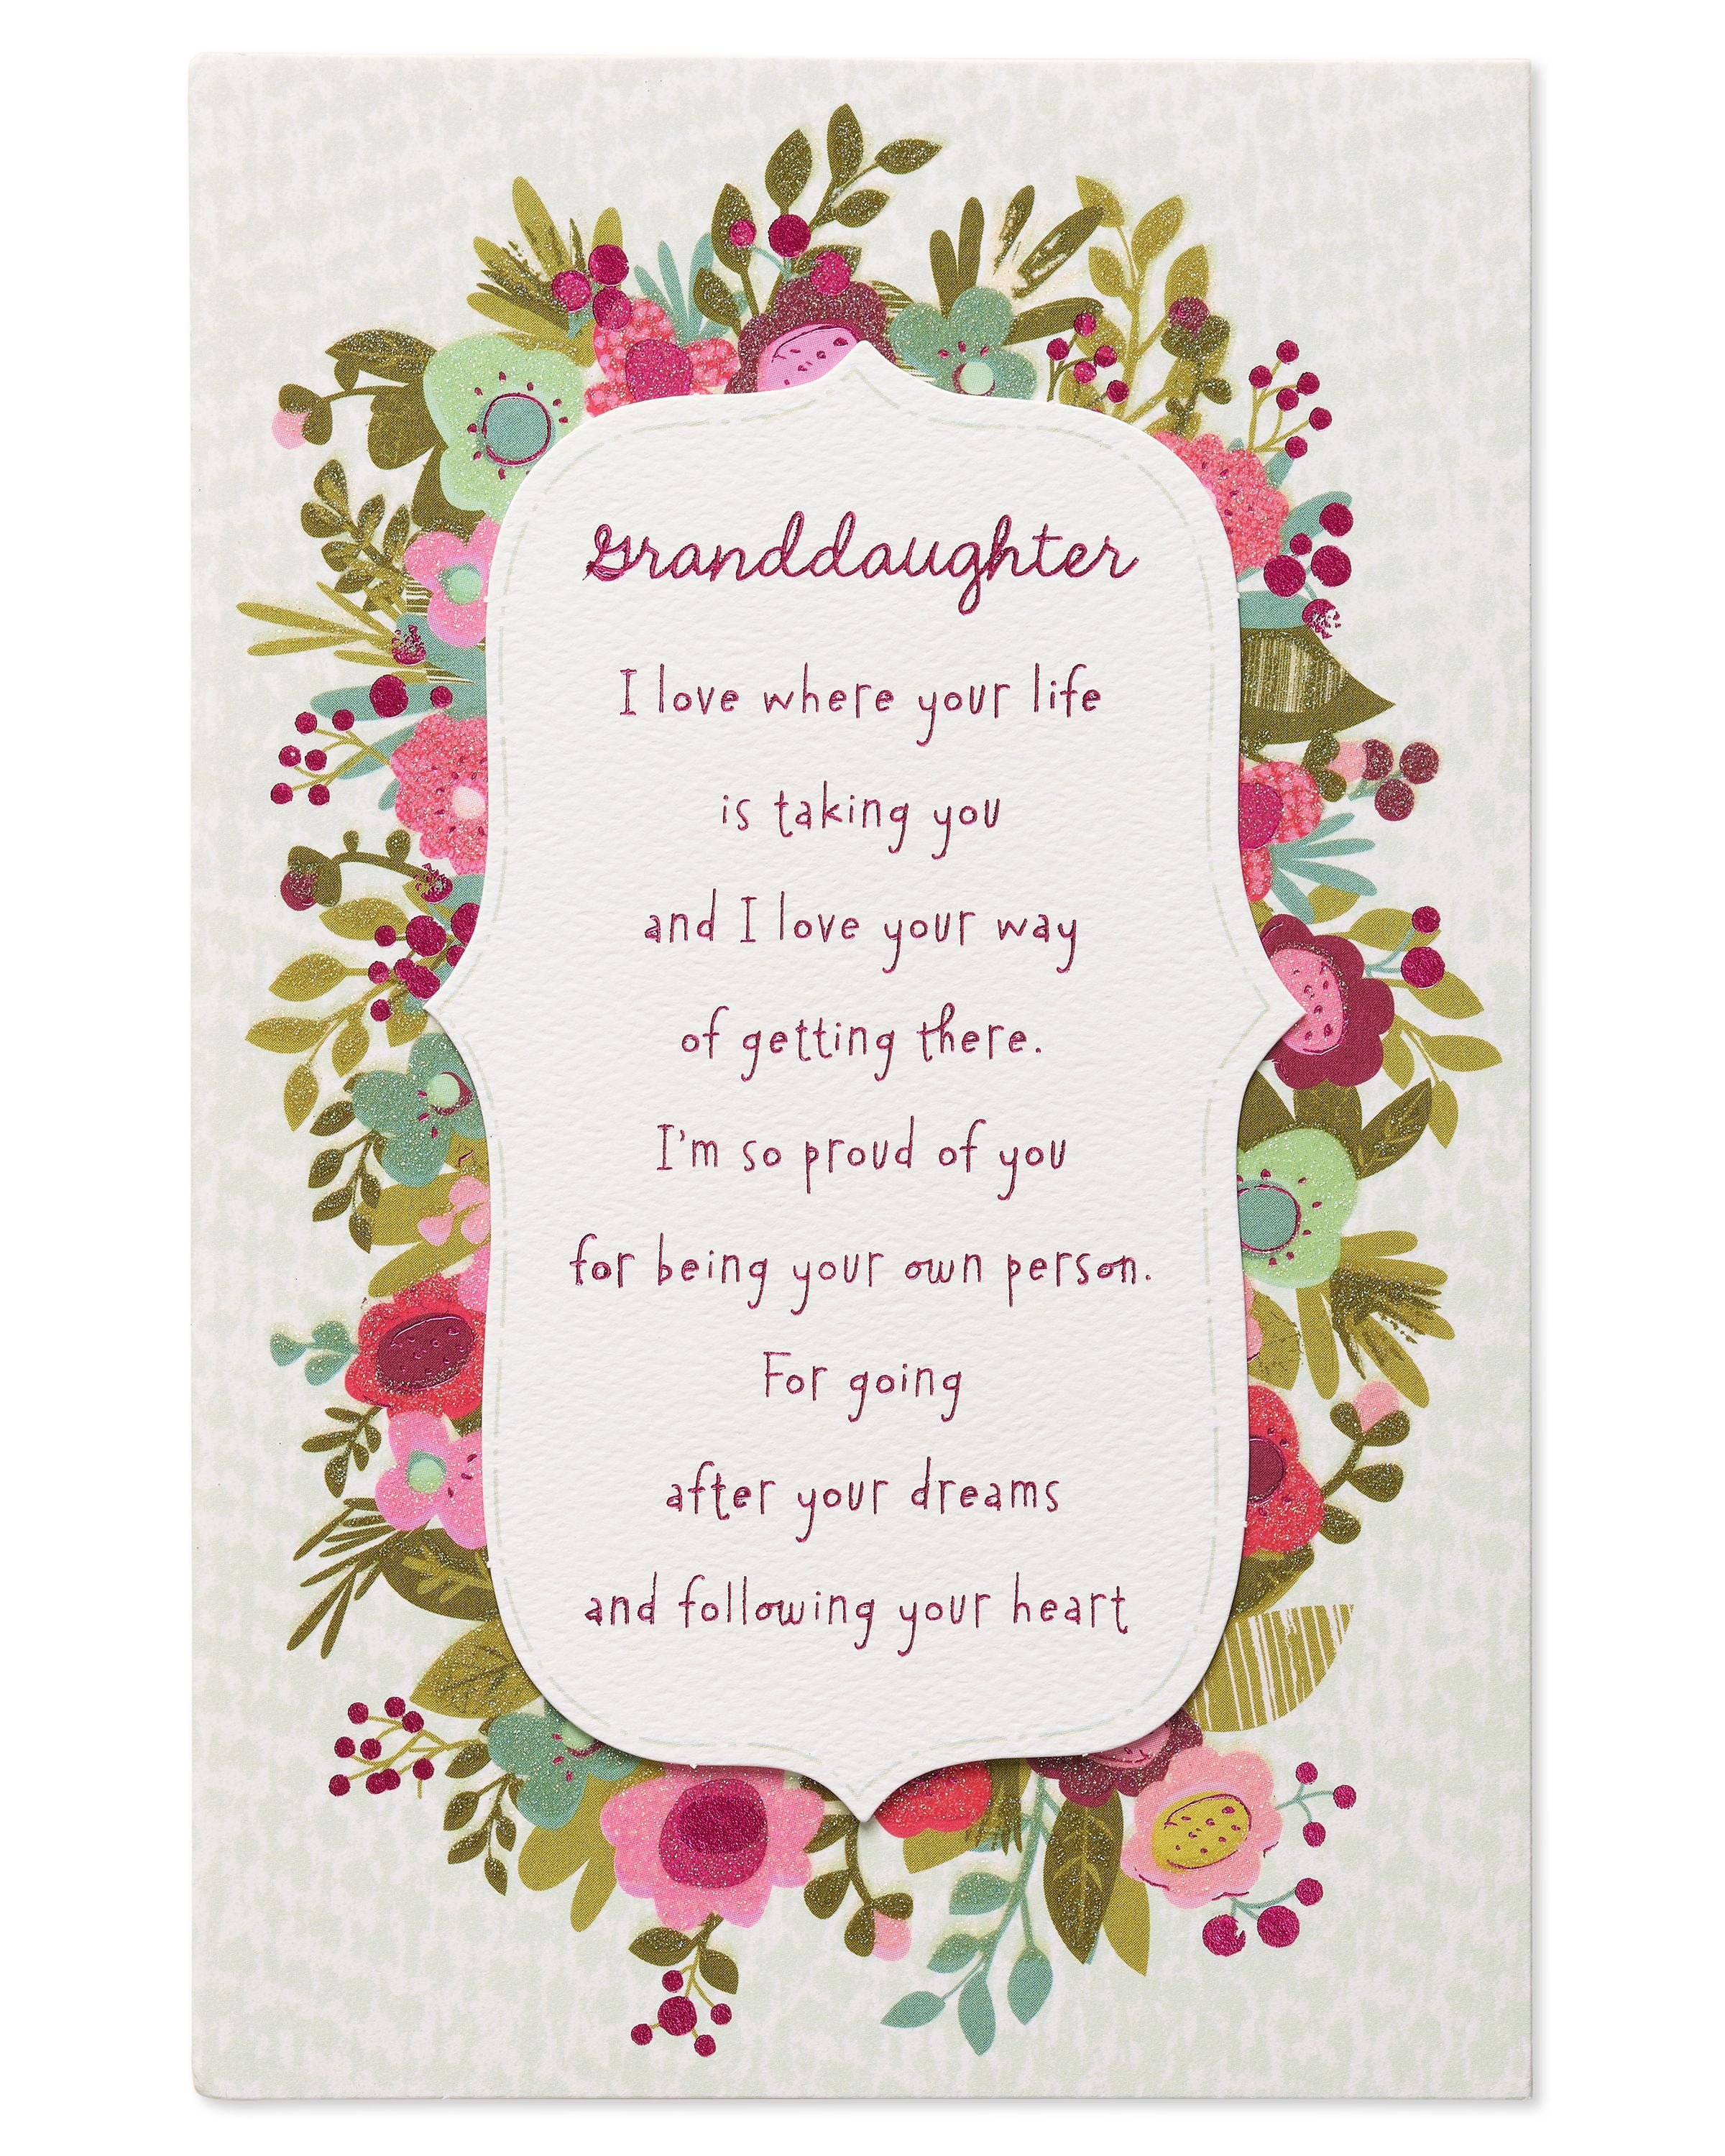 How To Make A Birthday Card For Granddaughter